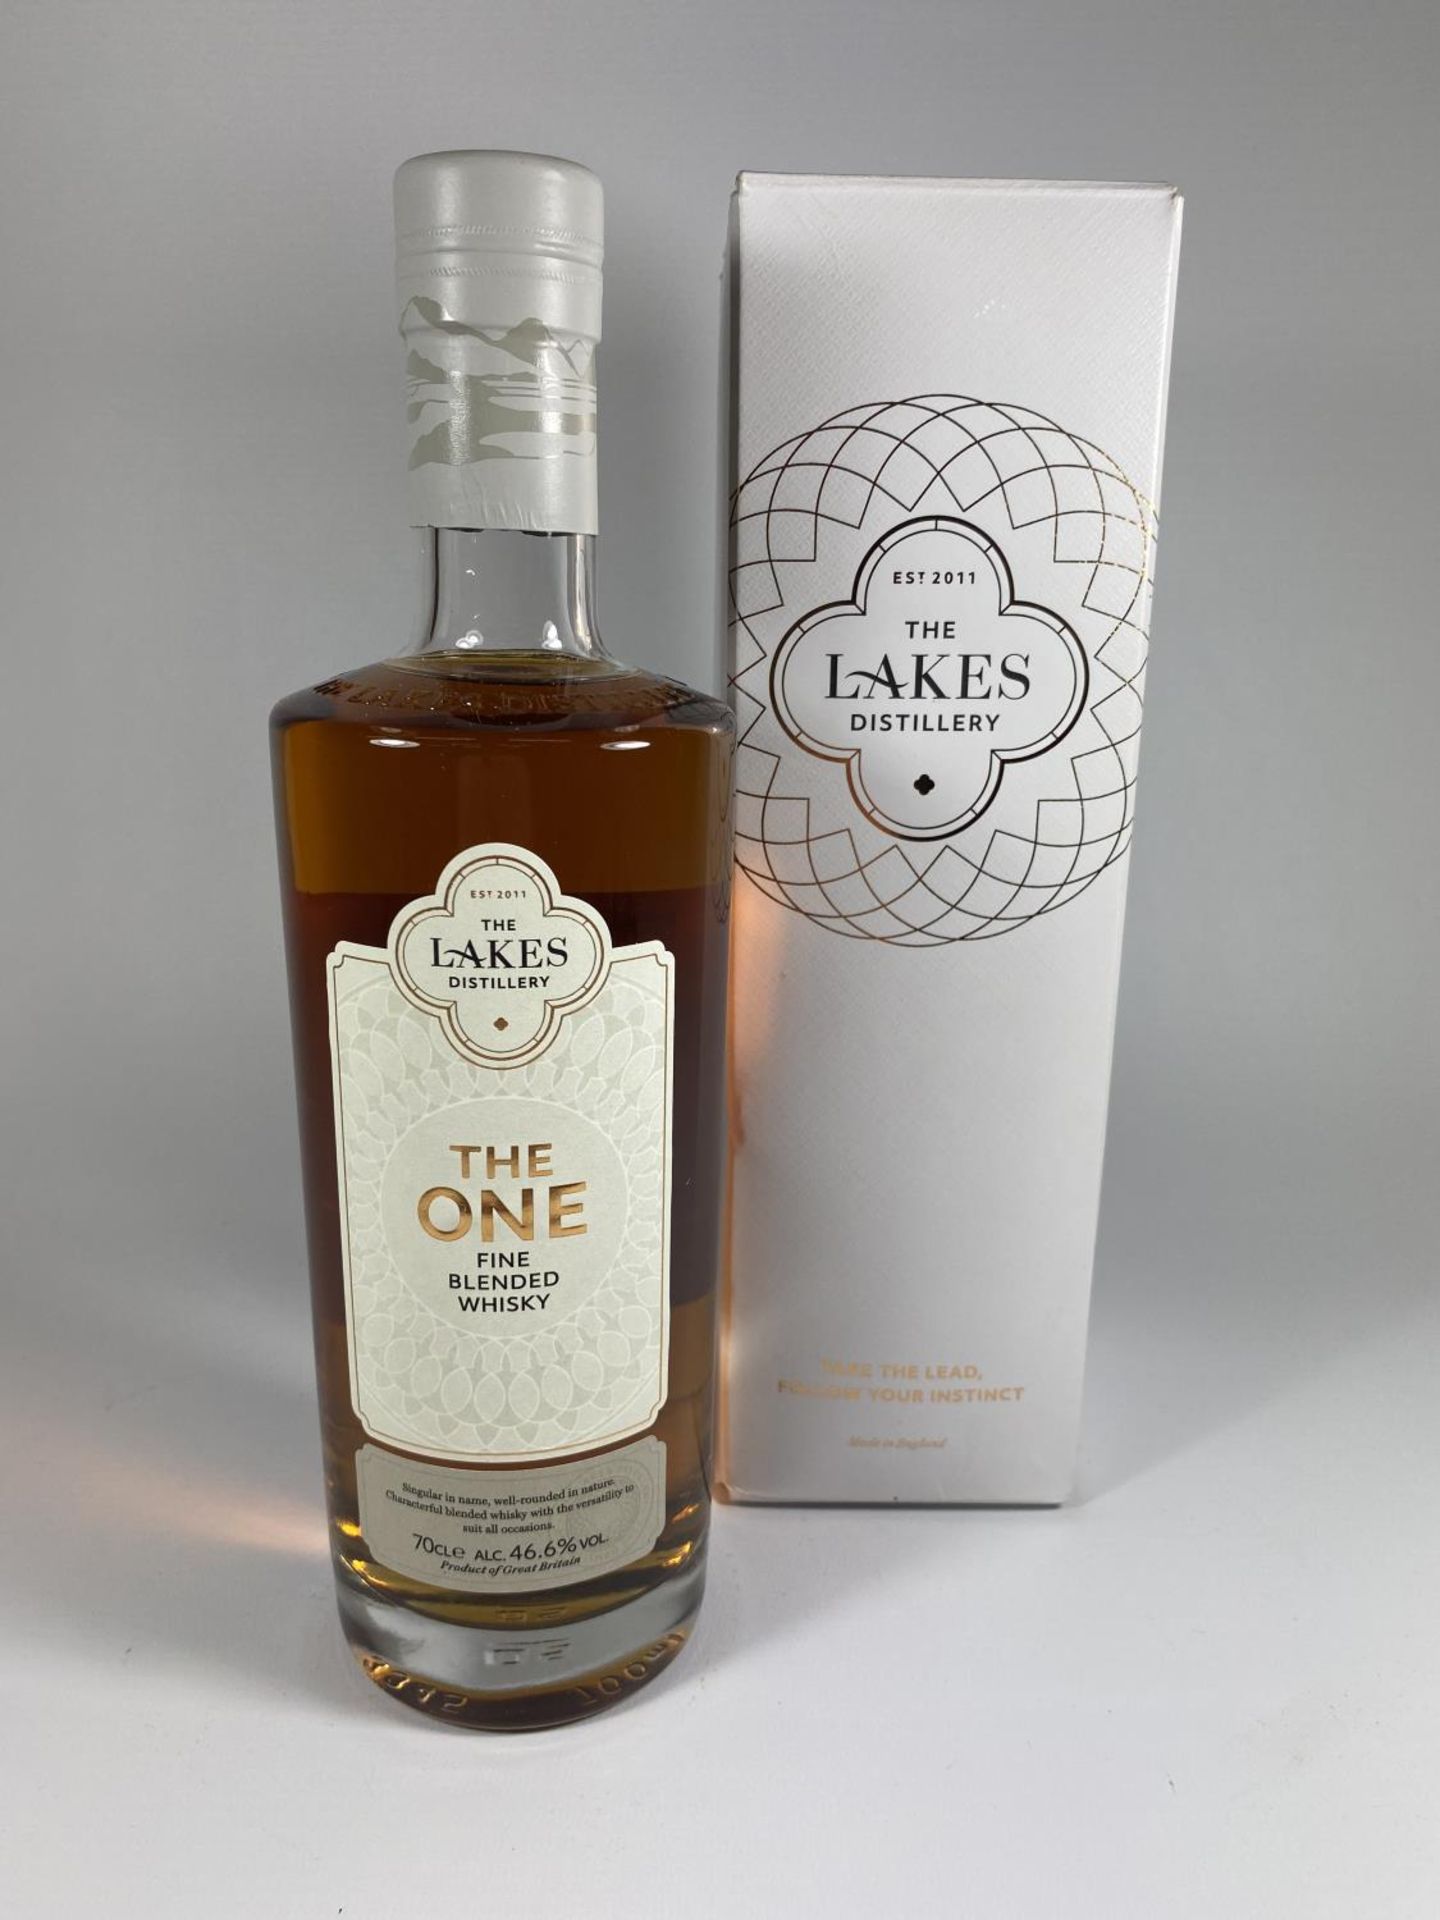 1 X 70CL BOXED BOTTLE - THE LAKES DISTILLERY 'THE ONE' FINE BLENDED WHISKY